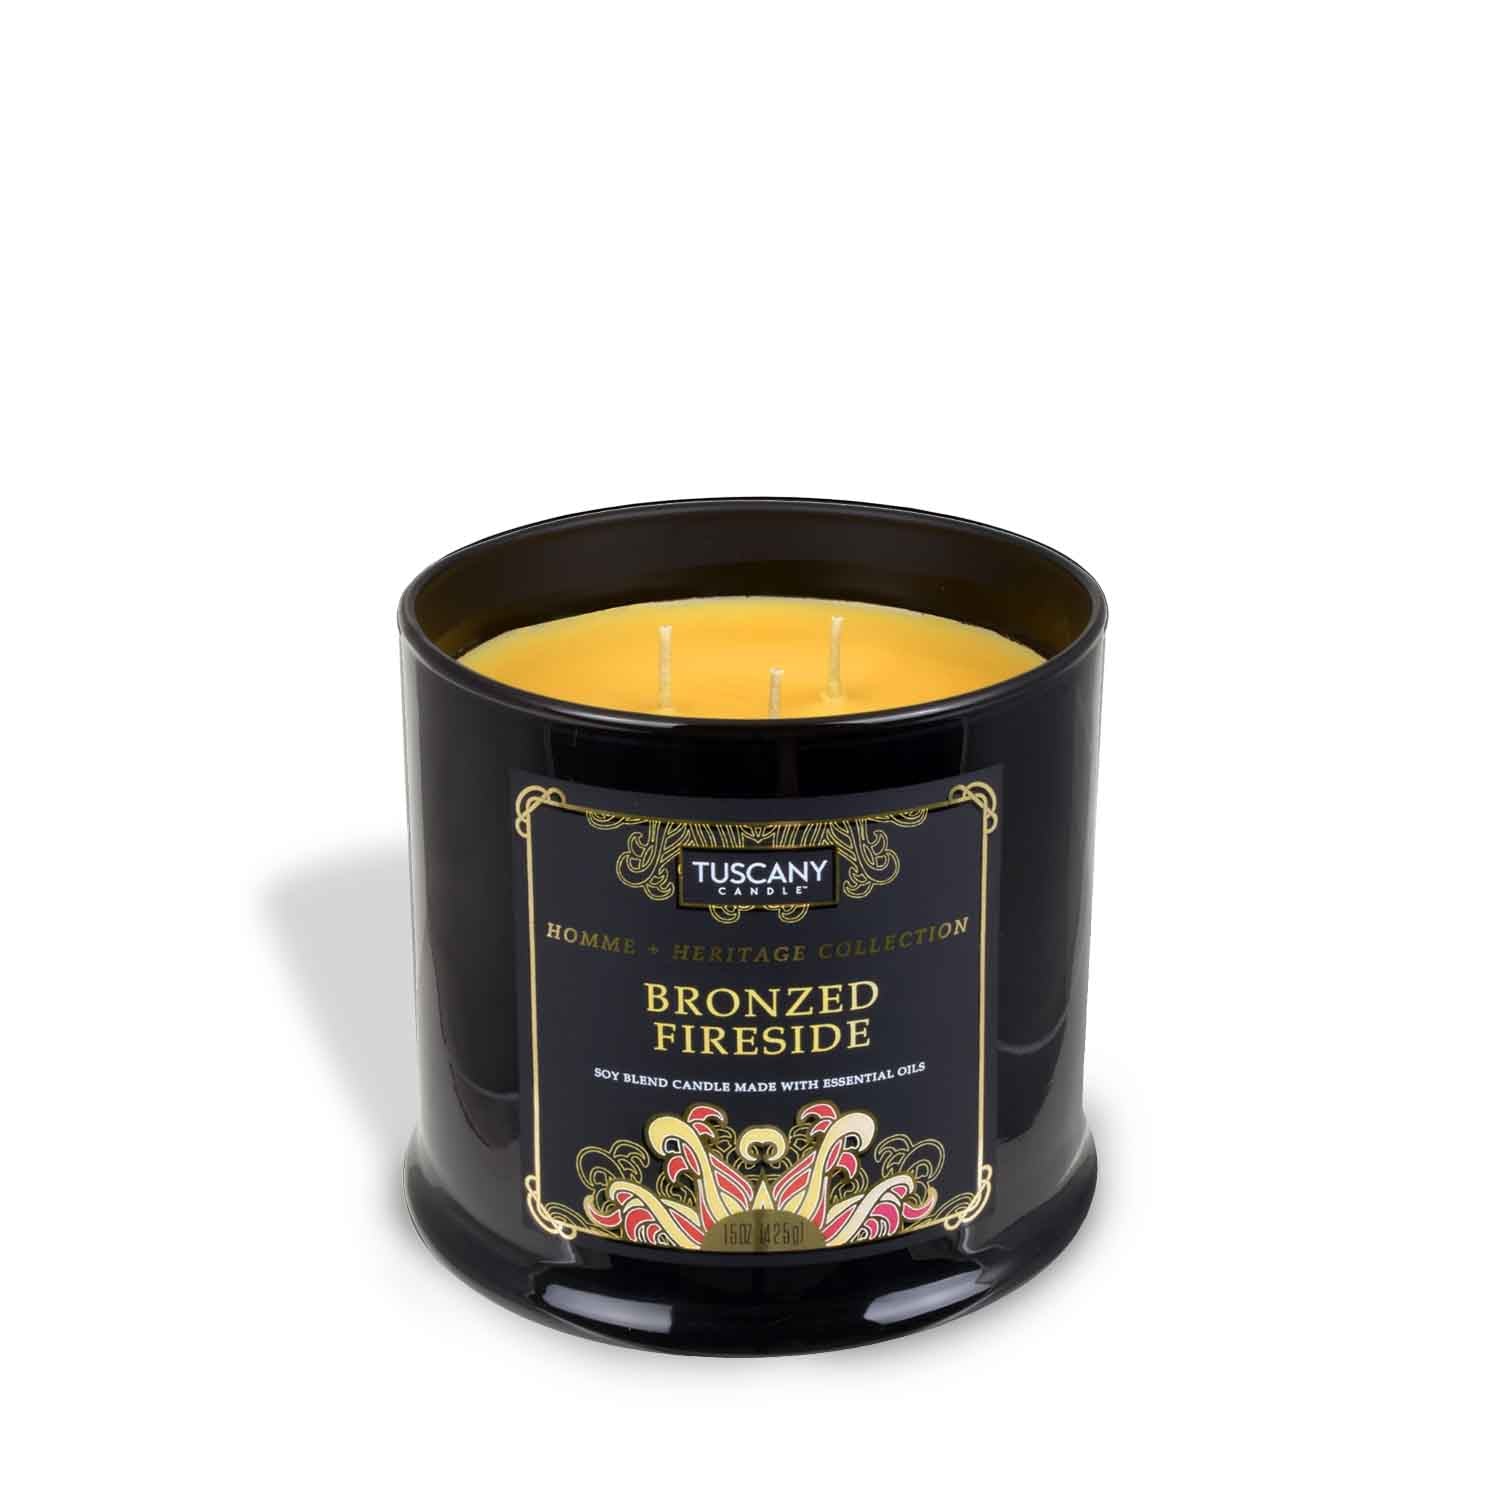 A long-lasting Bronzed Fireside scented jar candle (15 oz) from the Homme + Heritage Collection by Tuscany Candle, in a black tin on a white background.